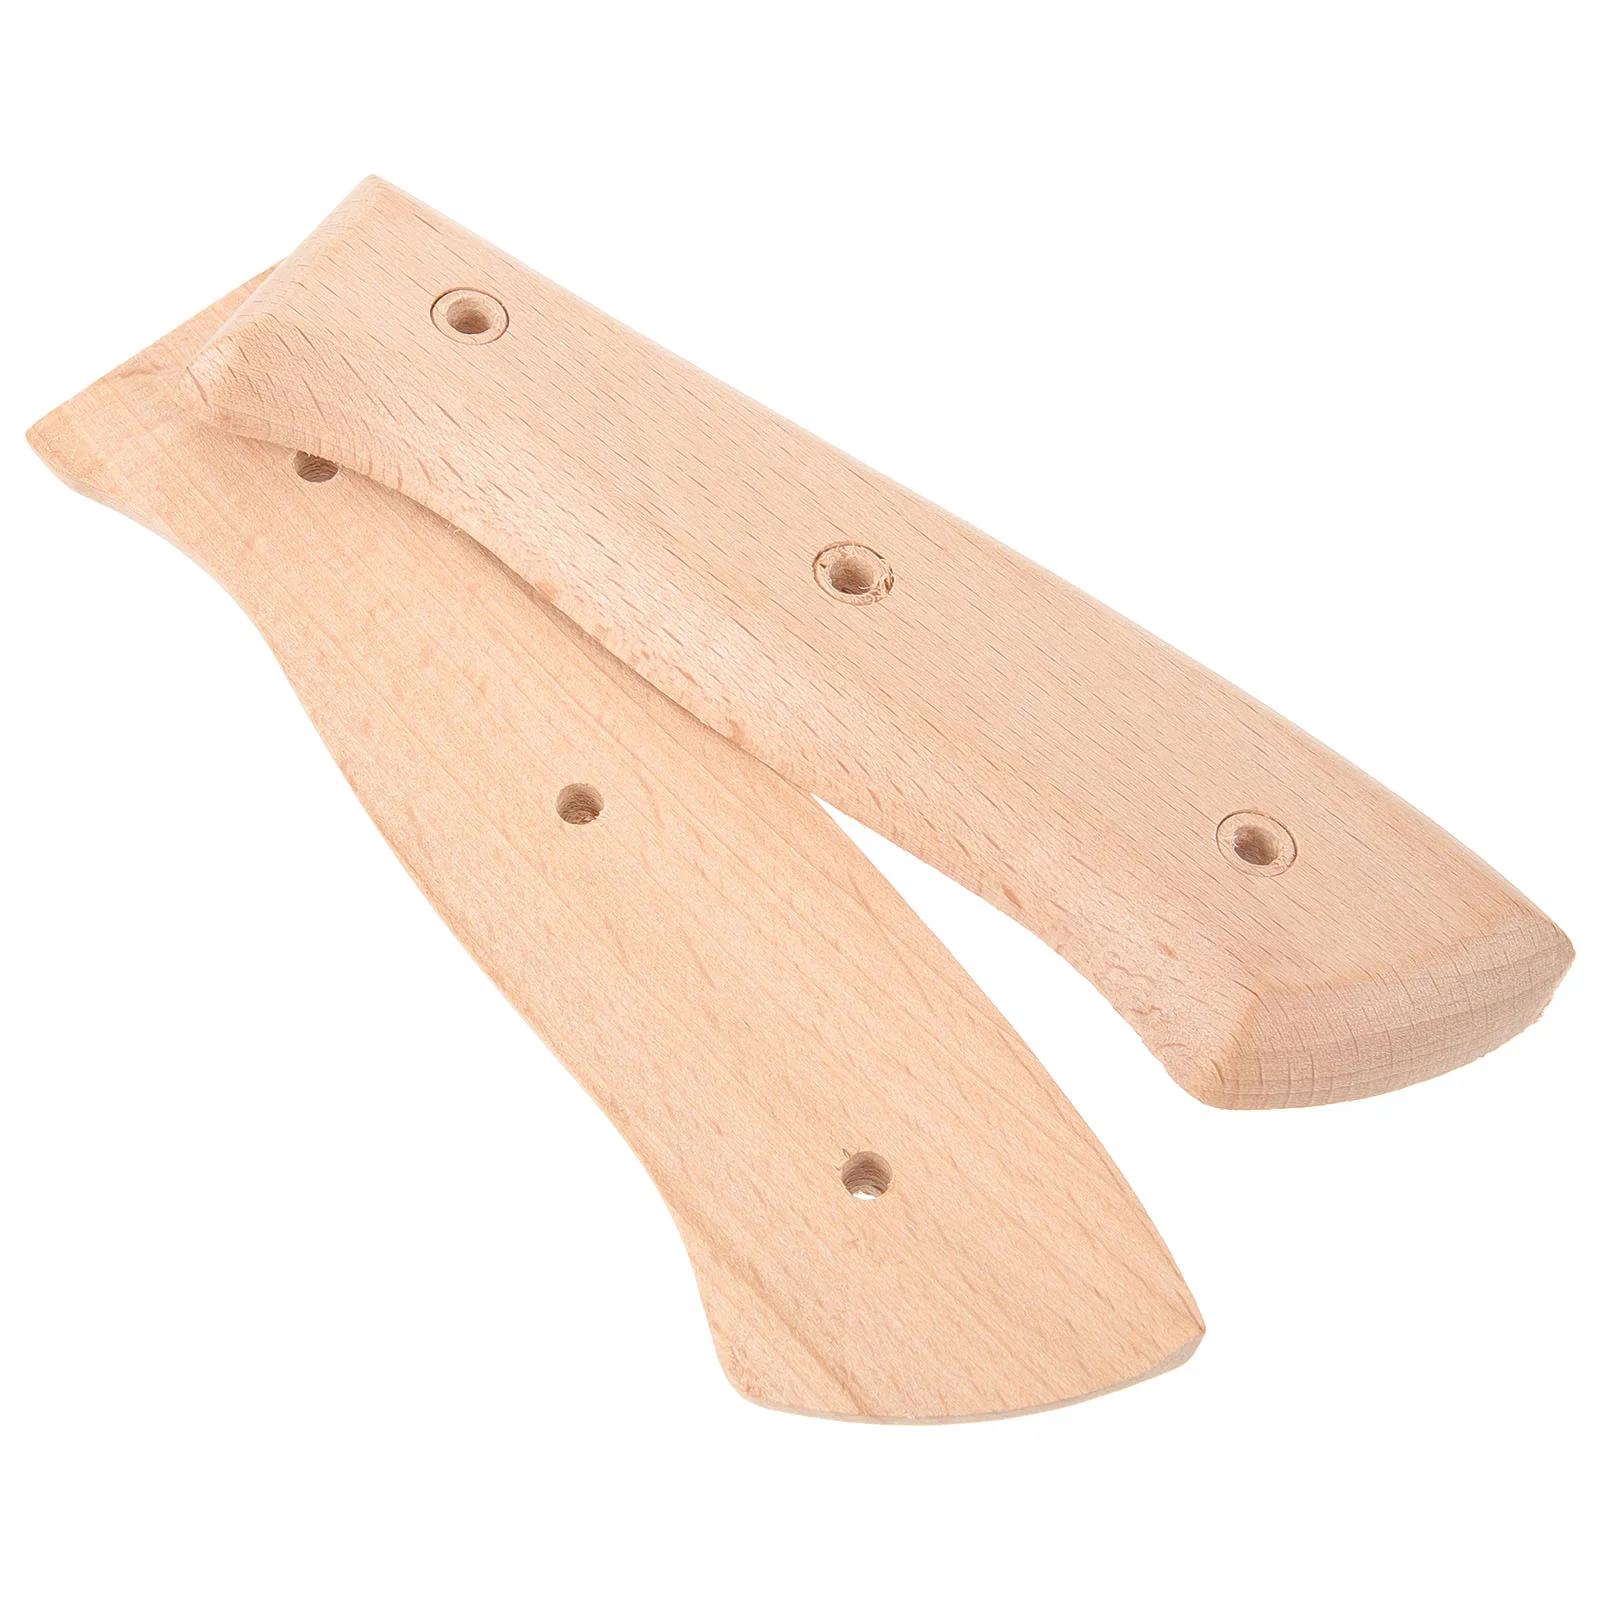 

Practical Handle Grip Knives Non-skid Wooden Kitchen Chopping Replacement